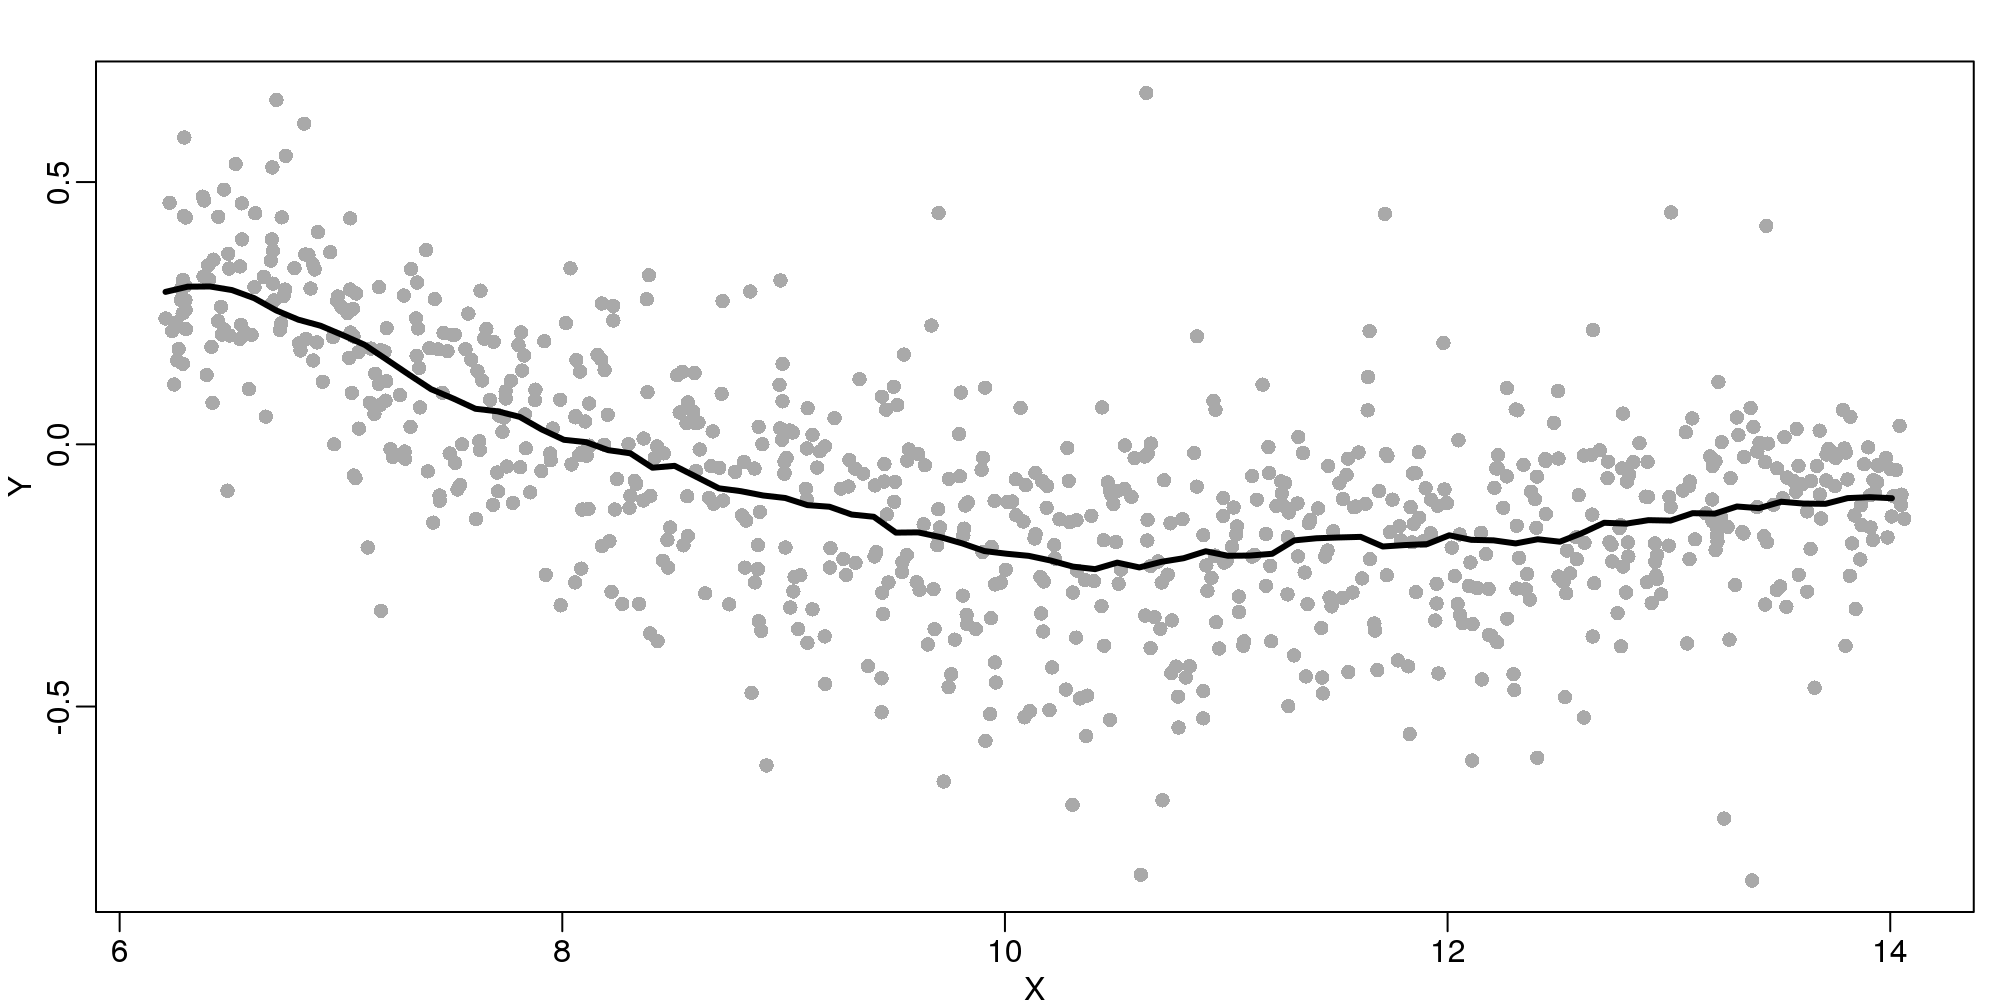 MA-plot with curve obtained with bin-smoothed curve shown.